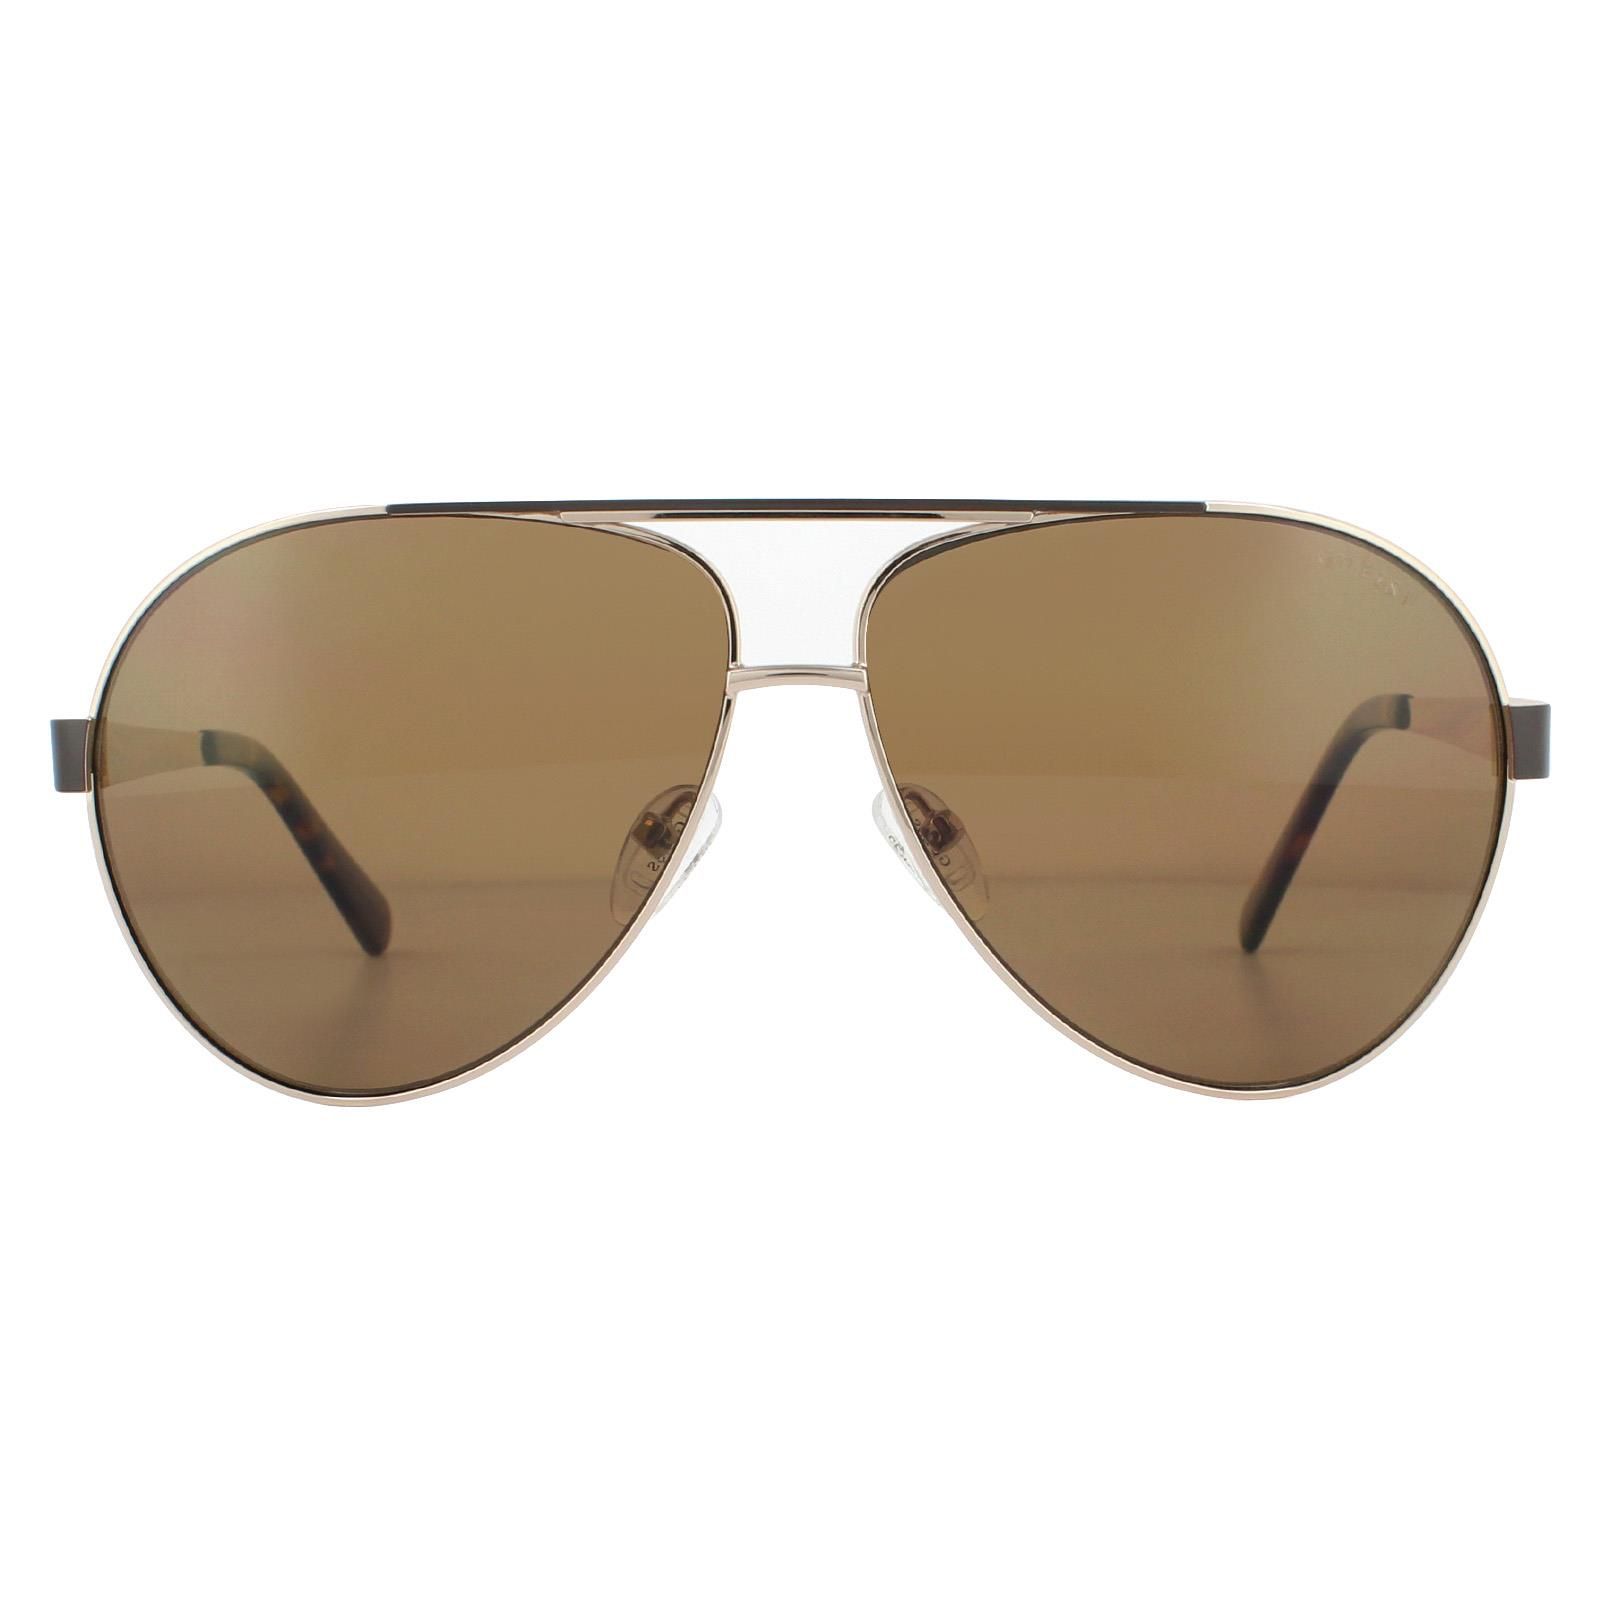 Guess Sunglasses GU6969 32H Gold Brown Polarized are a large lens aviator style with cut-out Guess G logo on the temples. The temple colours match the top brow bar for a unique two-tone effect.